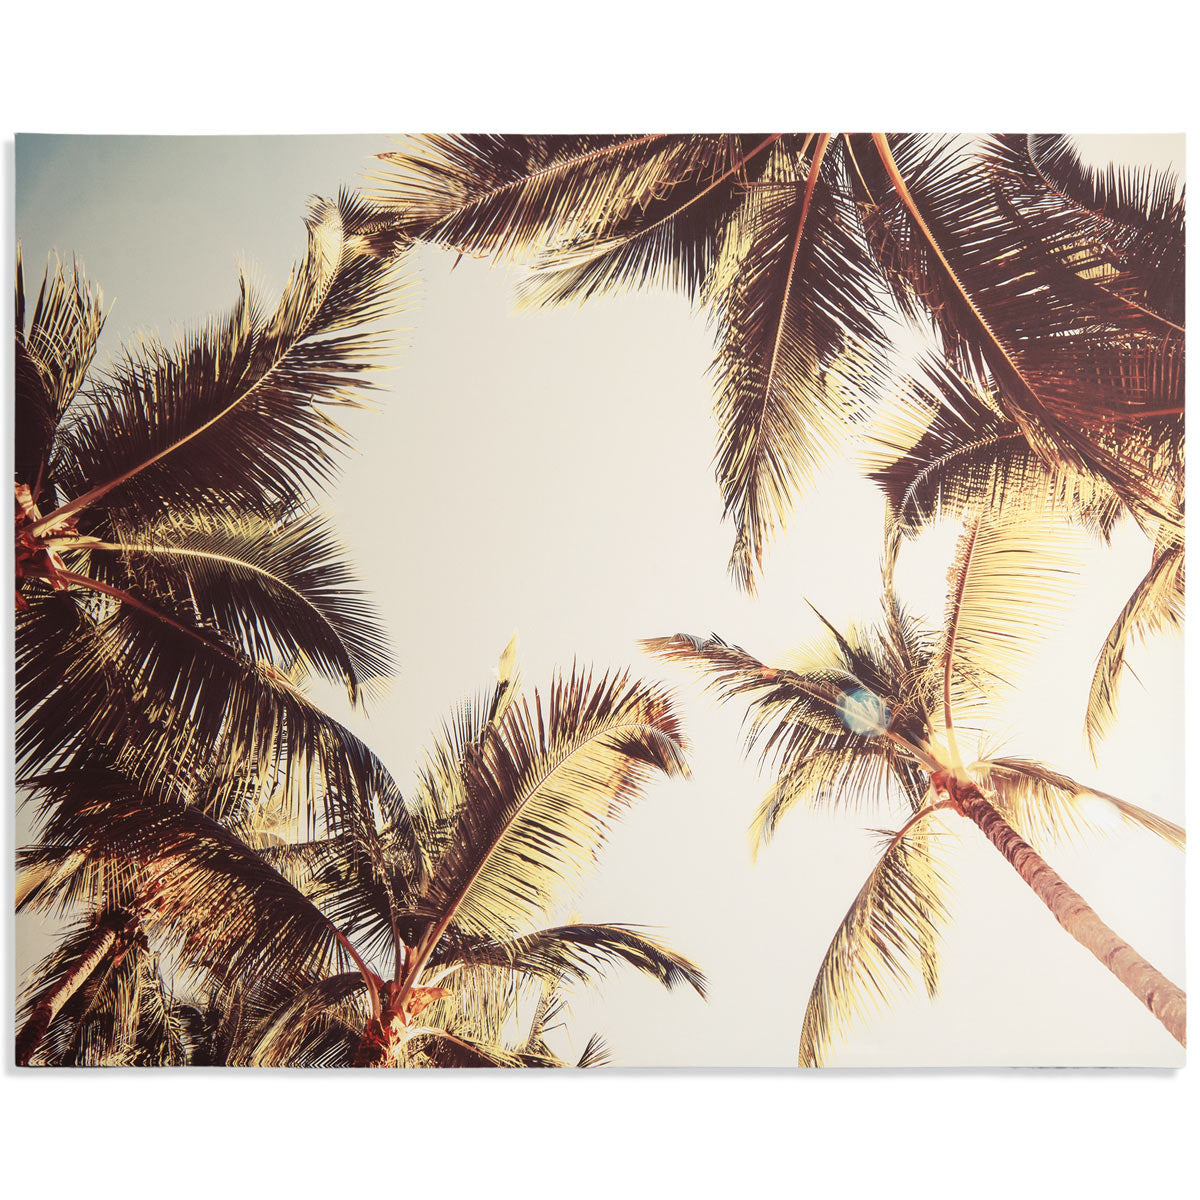 Artistic photograph of a filtered sky, taken from beneath a group of palm trees so that the fronds extend into the edges of the photo on all sides.